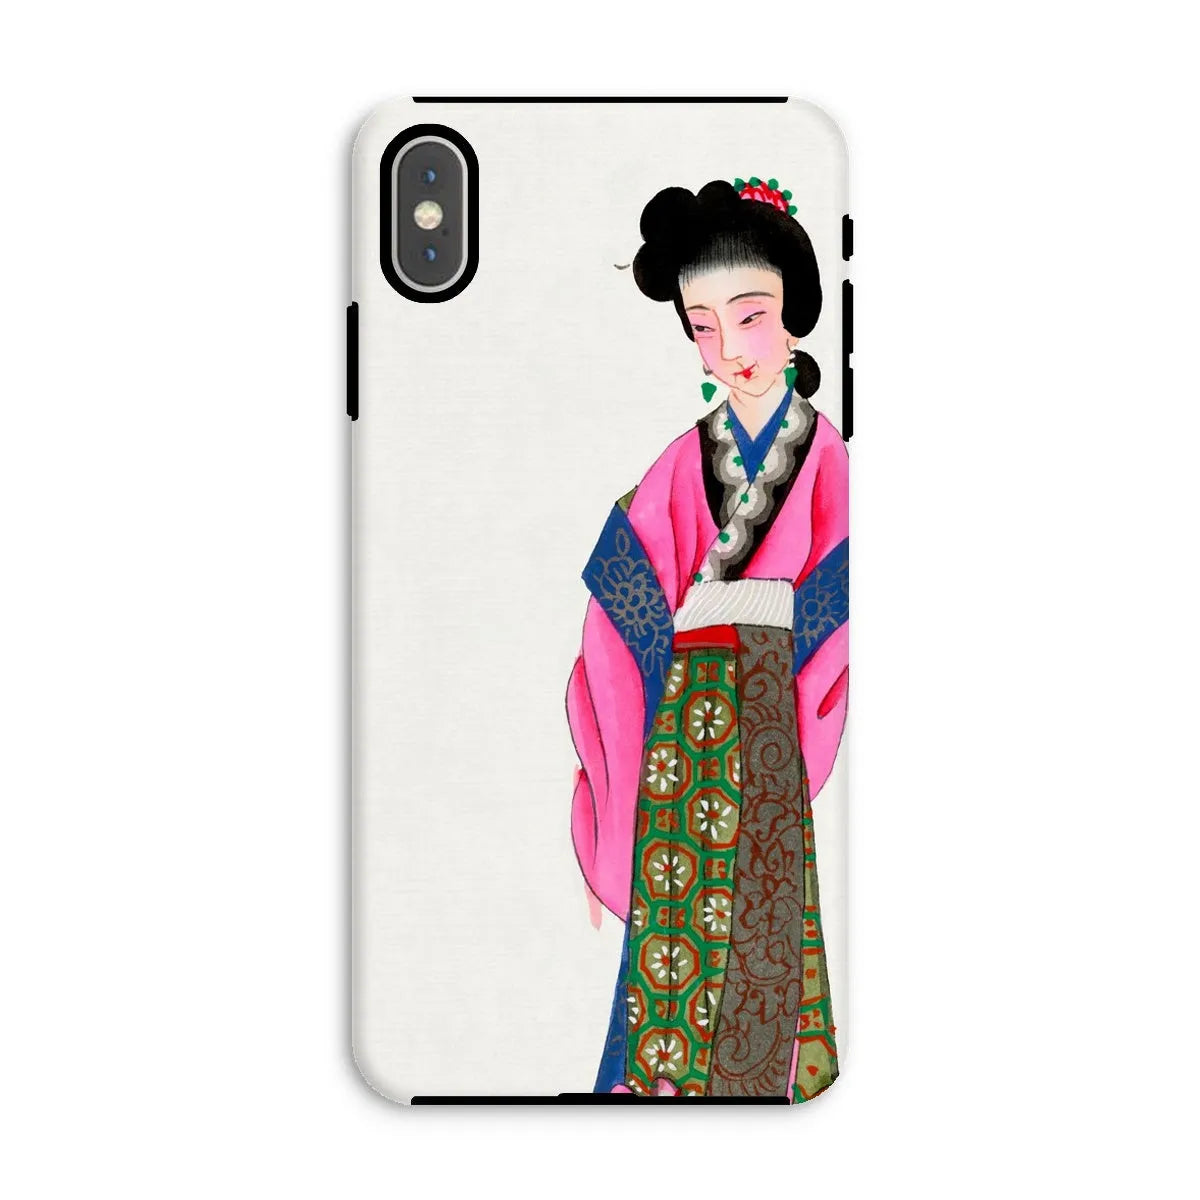 Noblewoman - Chinese Aesthetic Manchu Art Phone Case - Iphone Xs Max / Matte - Mobile Phone Cases - Aesthetic Art